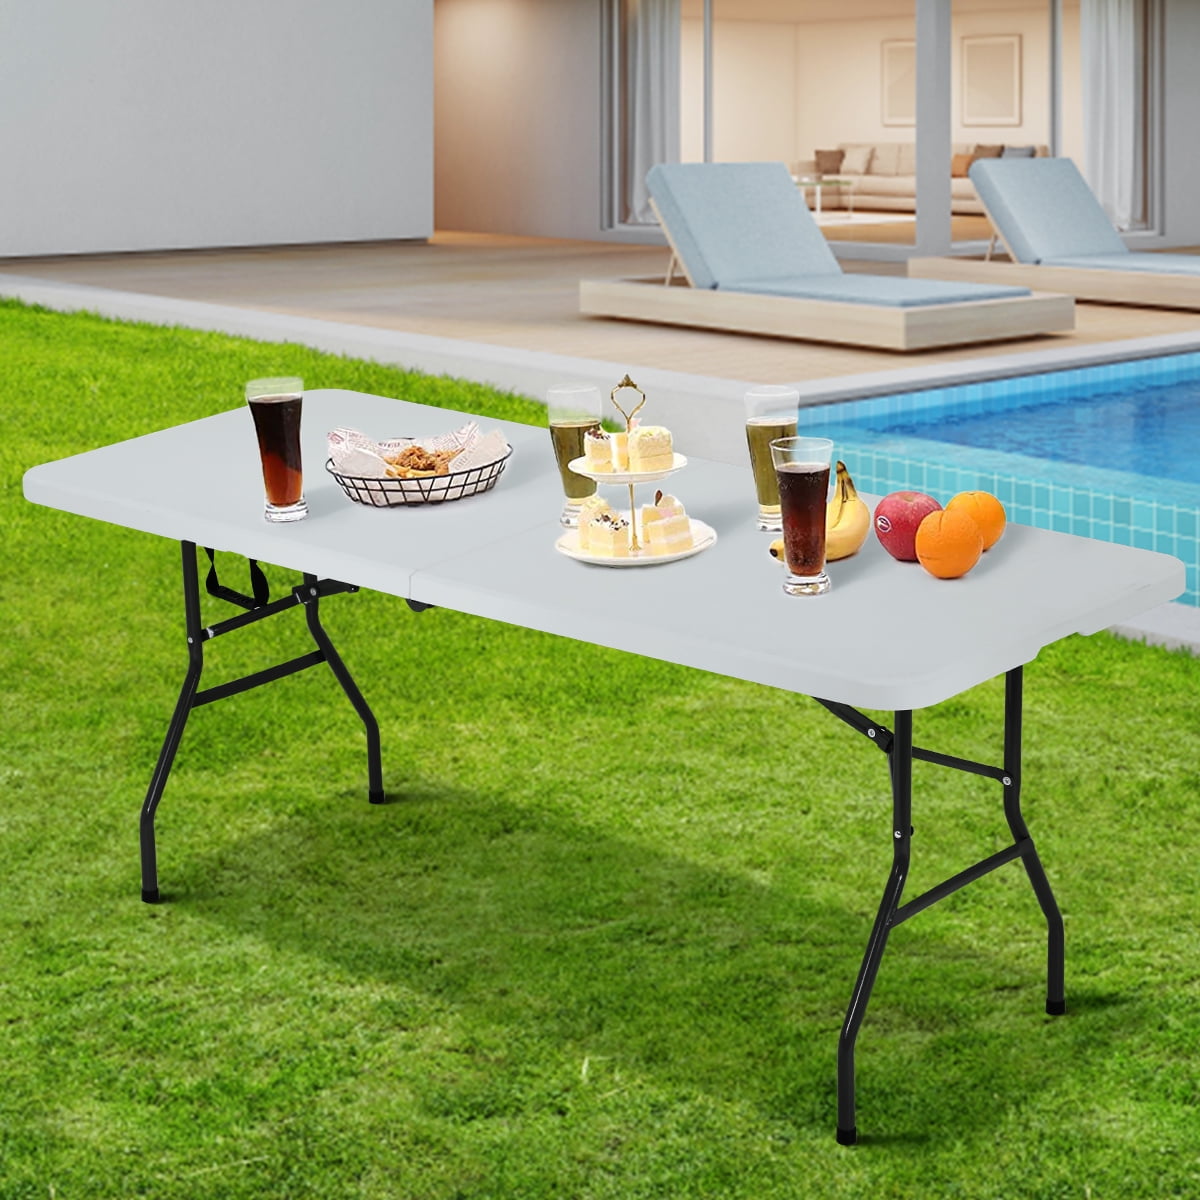 Banquet & Utility: Folding Tables, Chairs & More